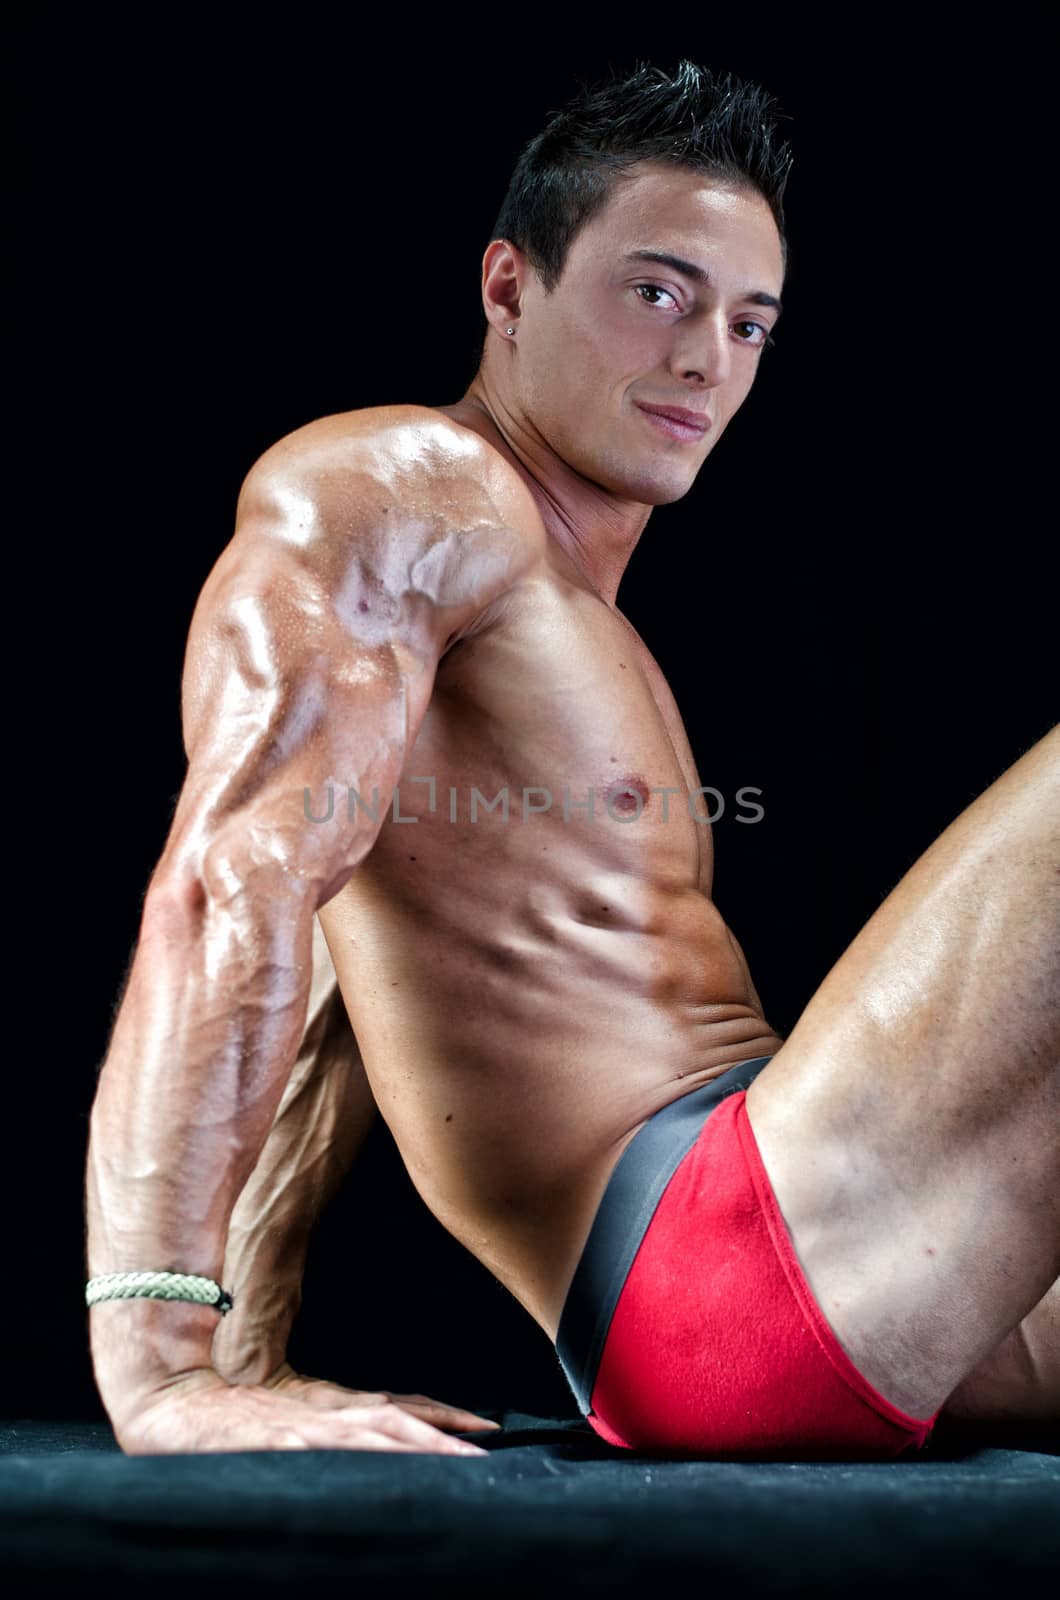 Handsome young man with muscular body, sitting on the floor showing ripped tricep, arm and abs